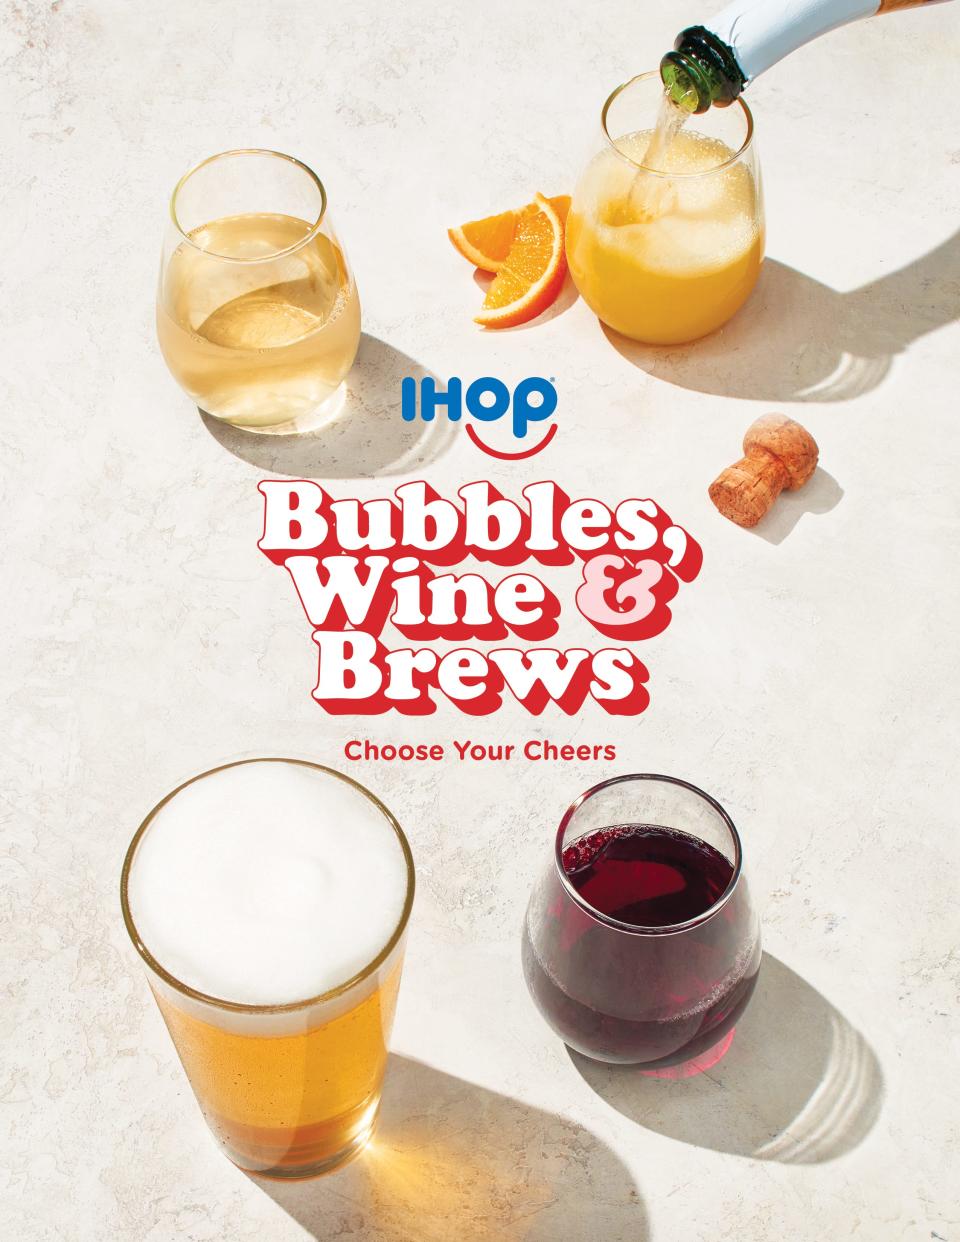 IHOP is testing the "Bubbles, Wine & Brews" menu at select California and New Mexico locations and has plans to expand to more states.